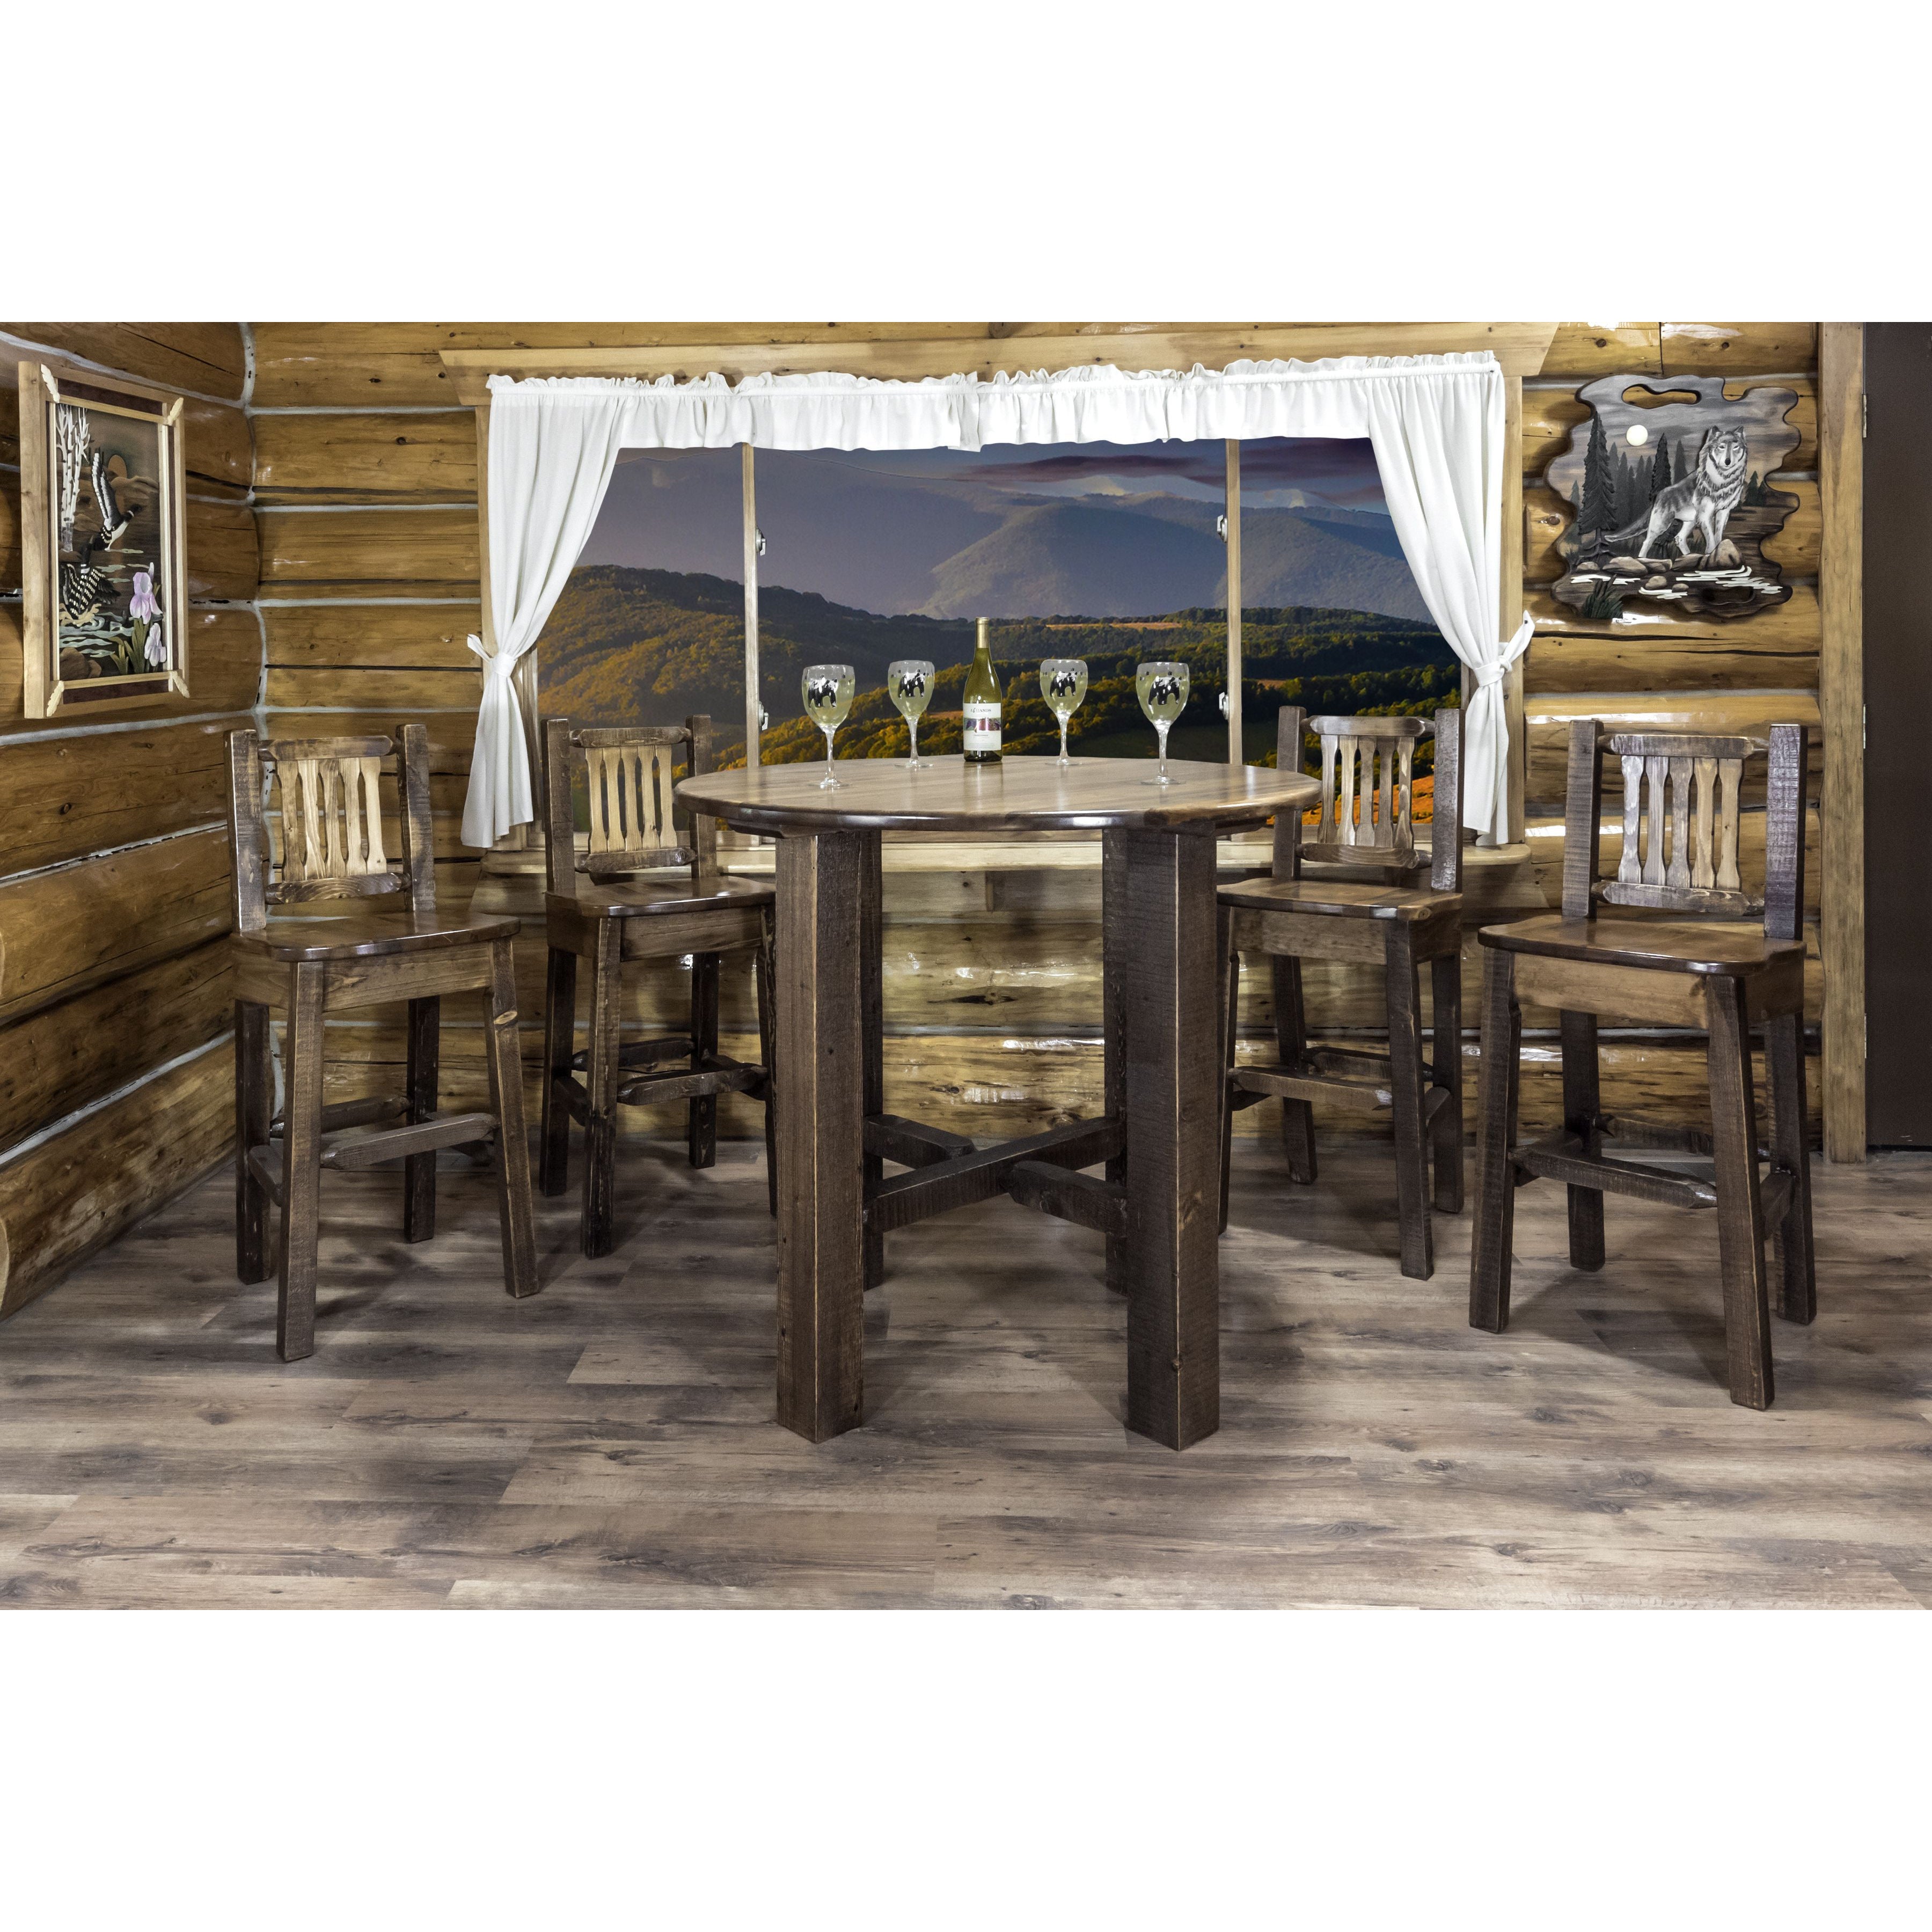 Montana Homestead Collection Bistro Table Stain LacquerFinish MWHCBTSL With Chairs